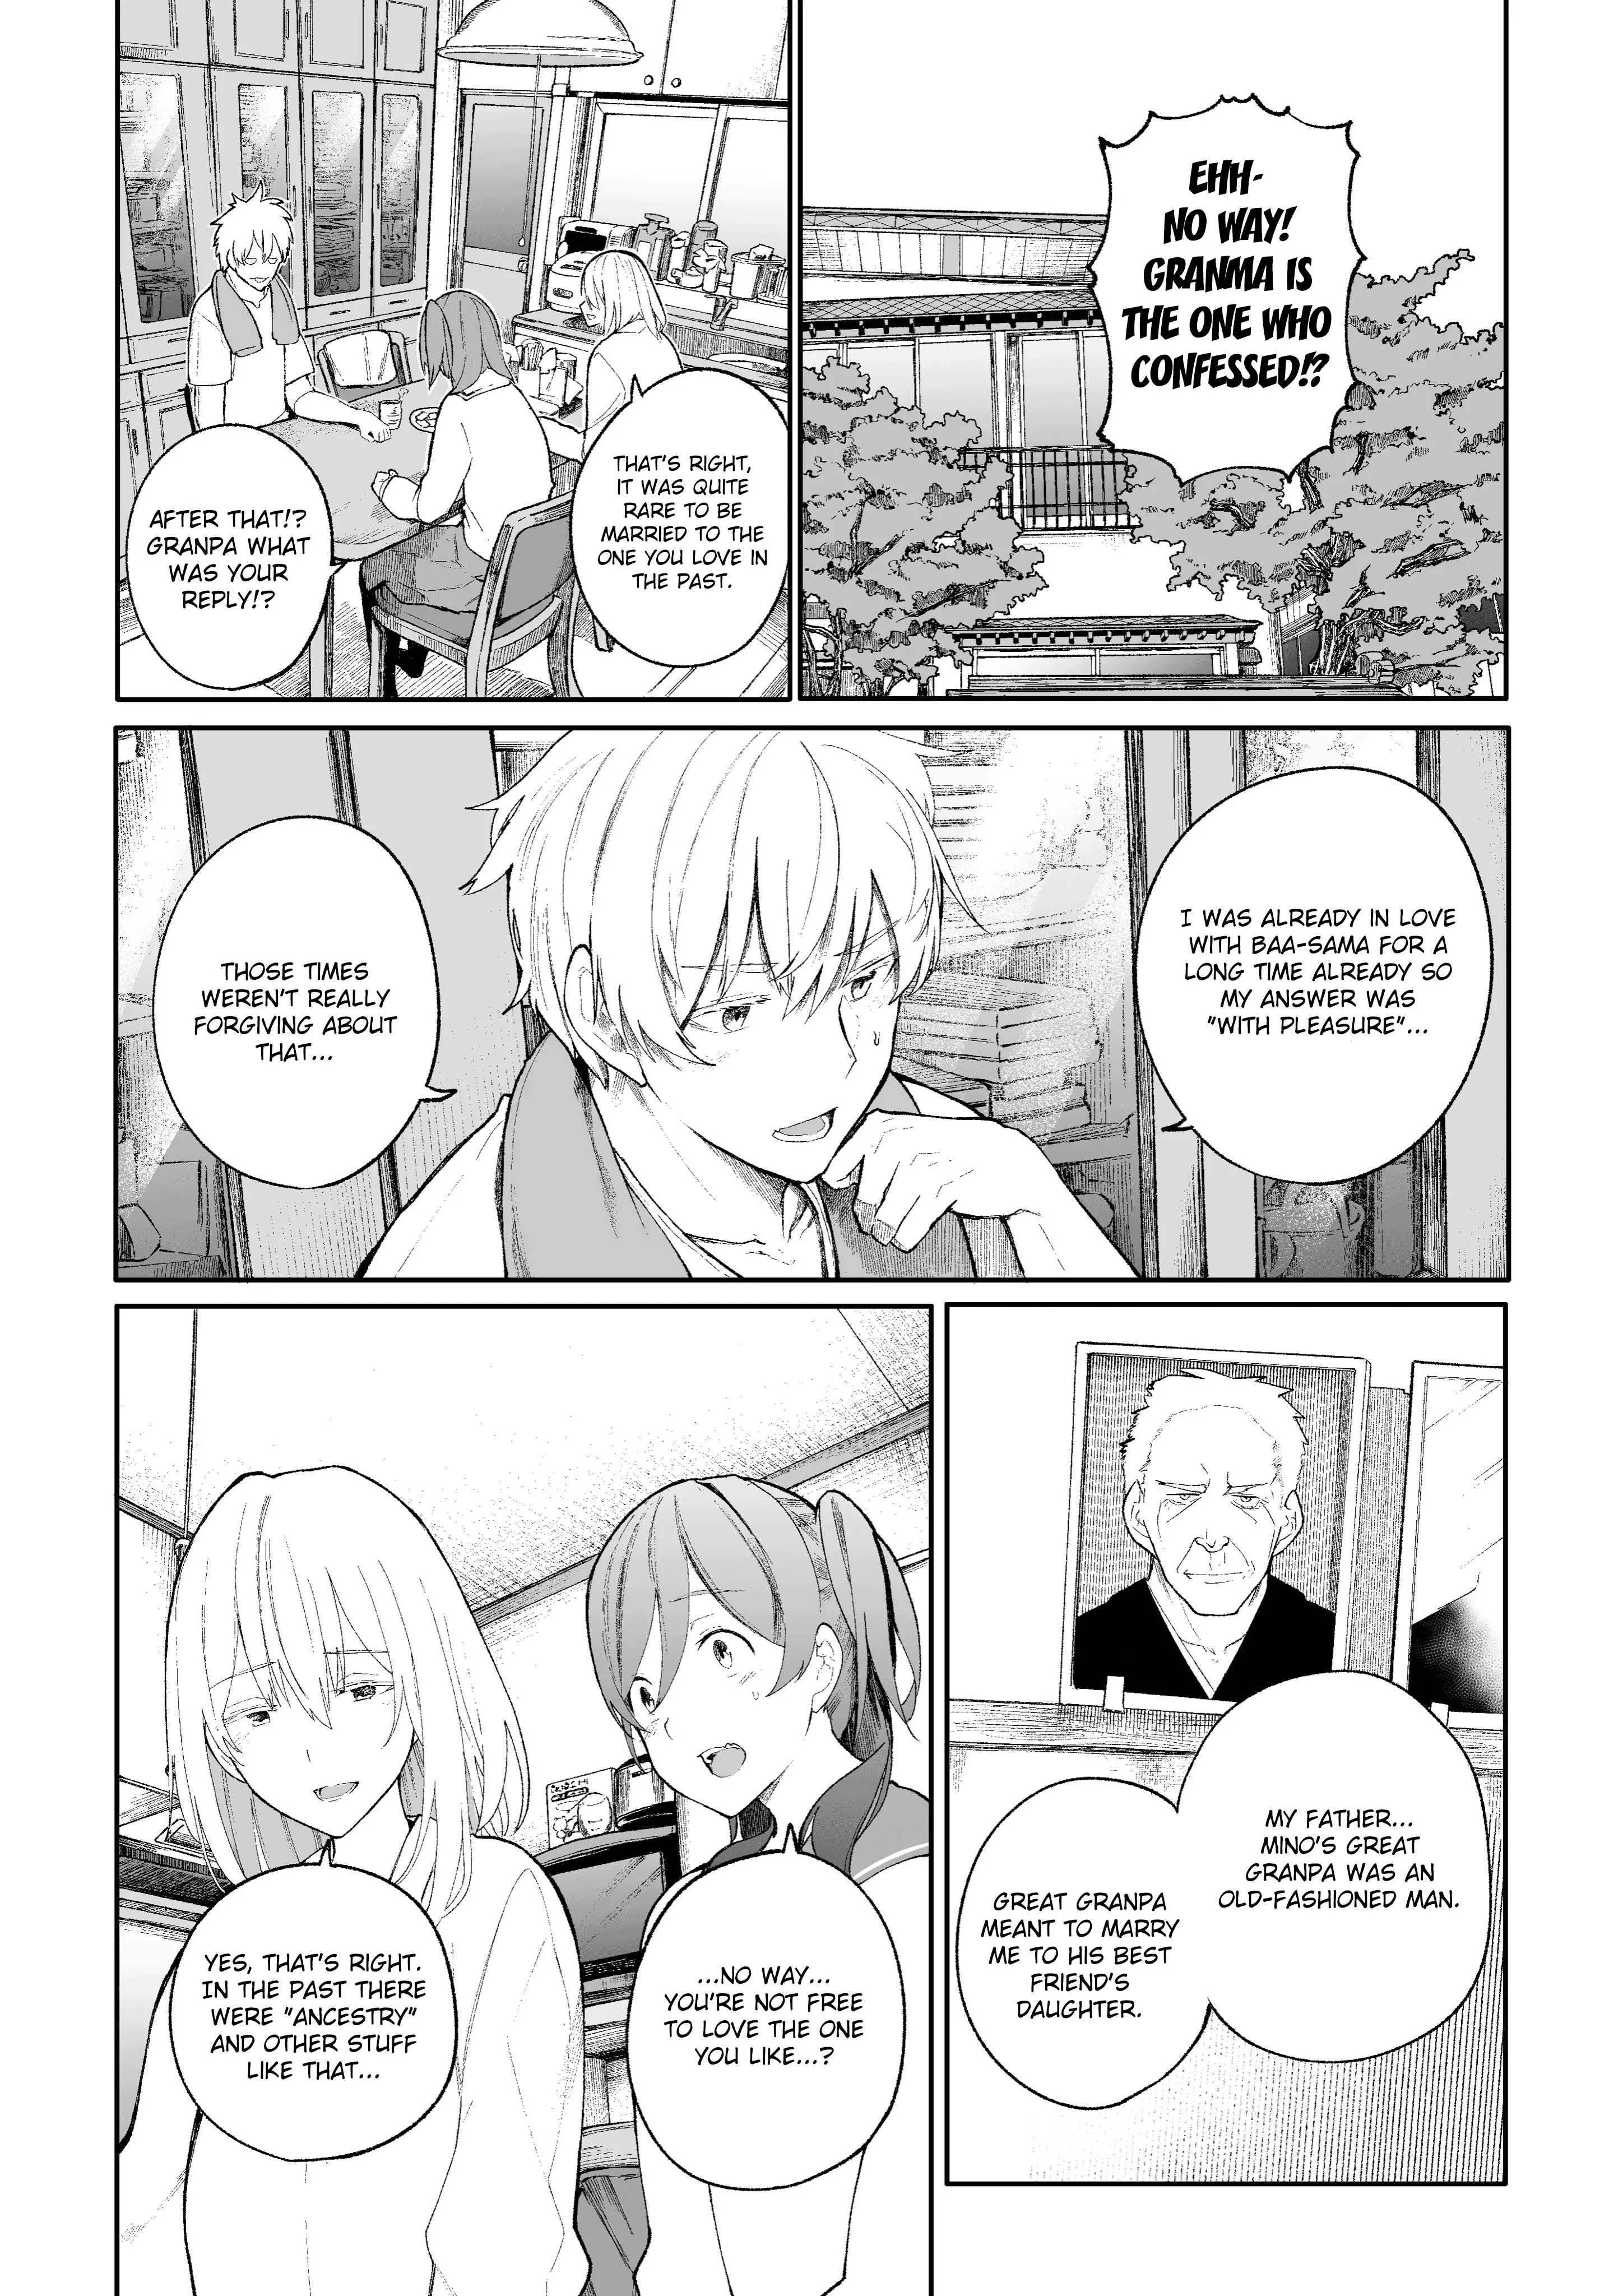 A Story About A Grandpa And Grandma Who Returned Back To Their Youth - 8 page 1-00cc021c